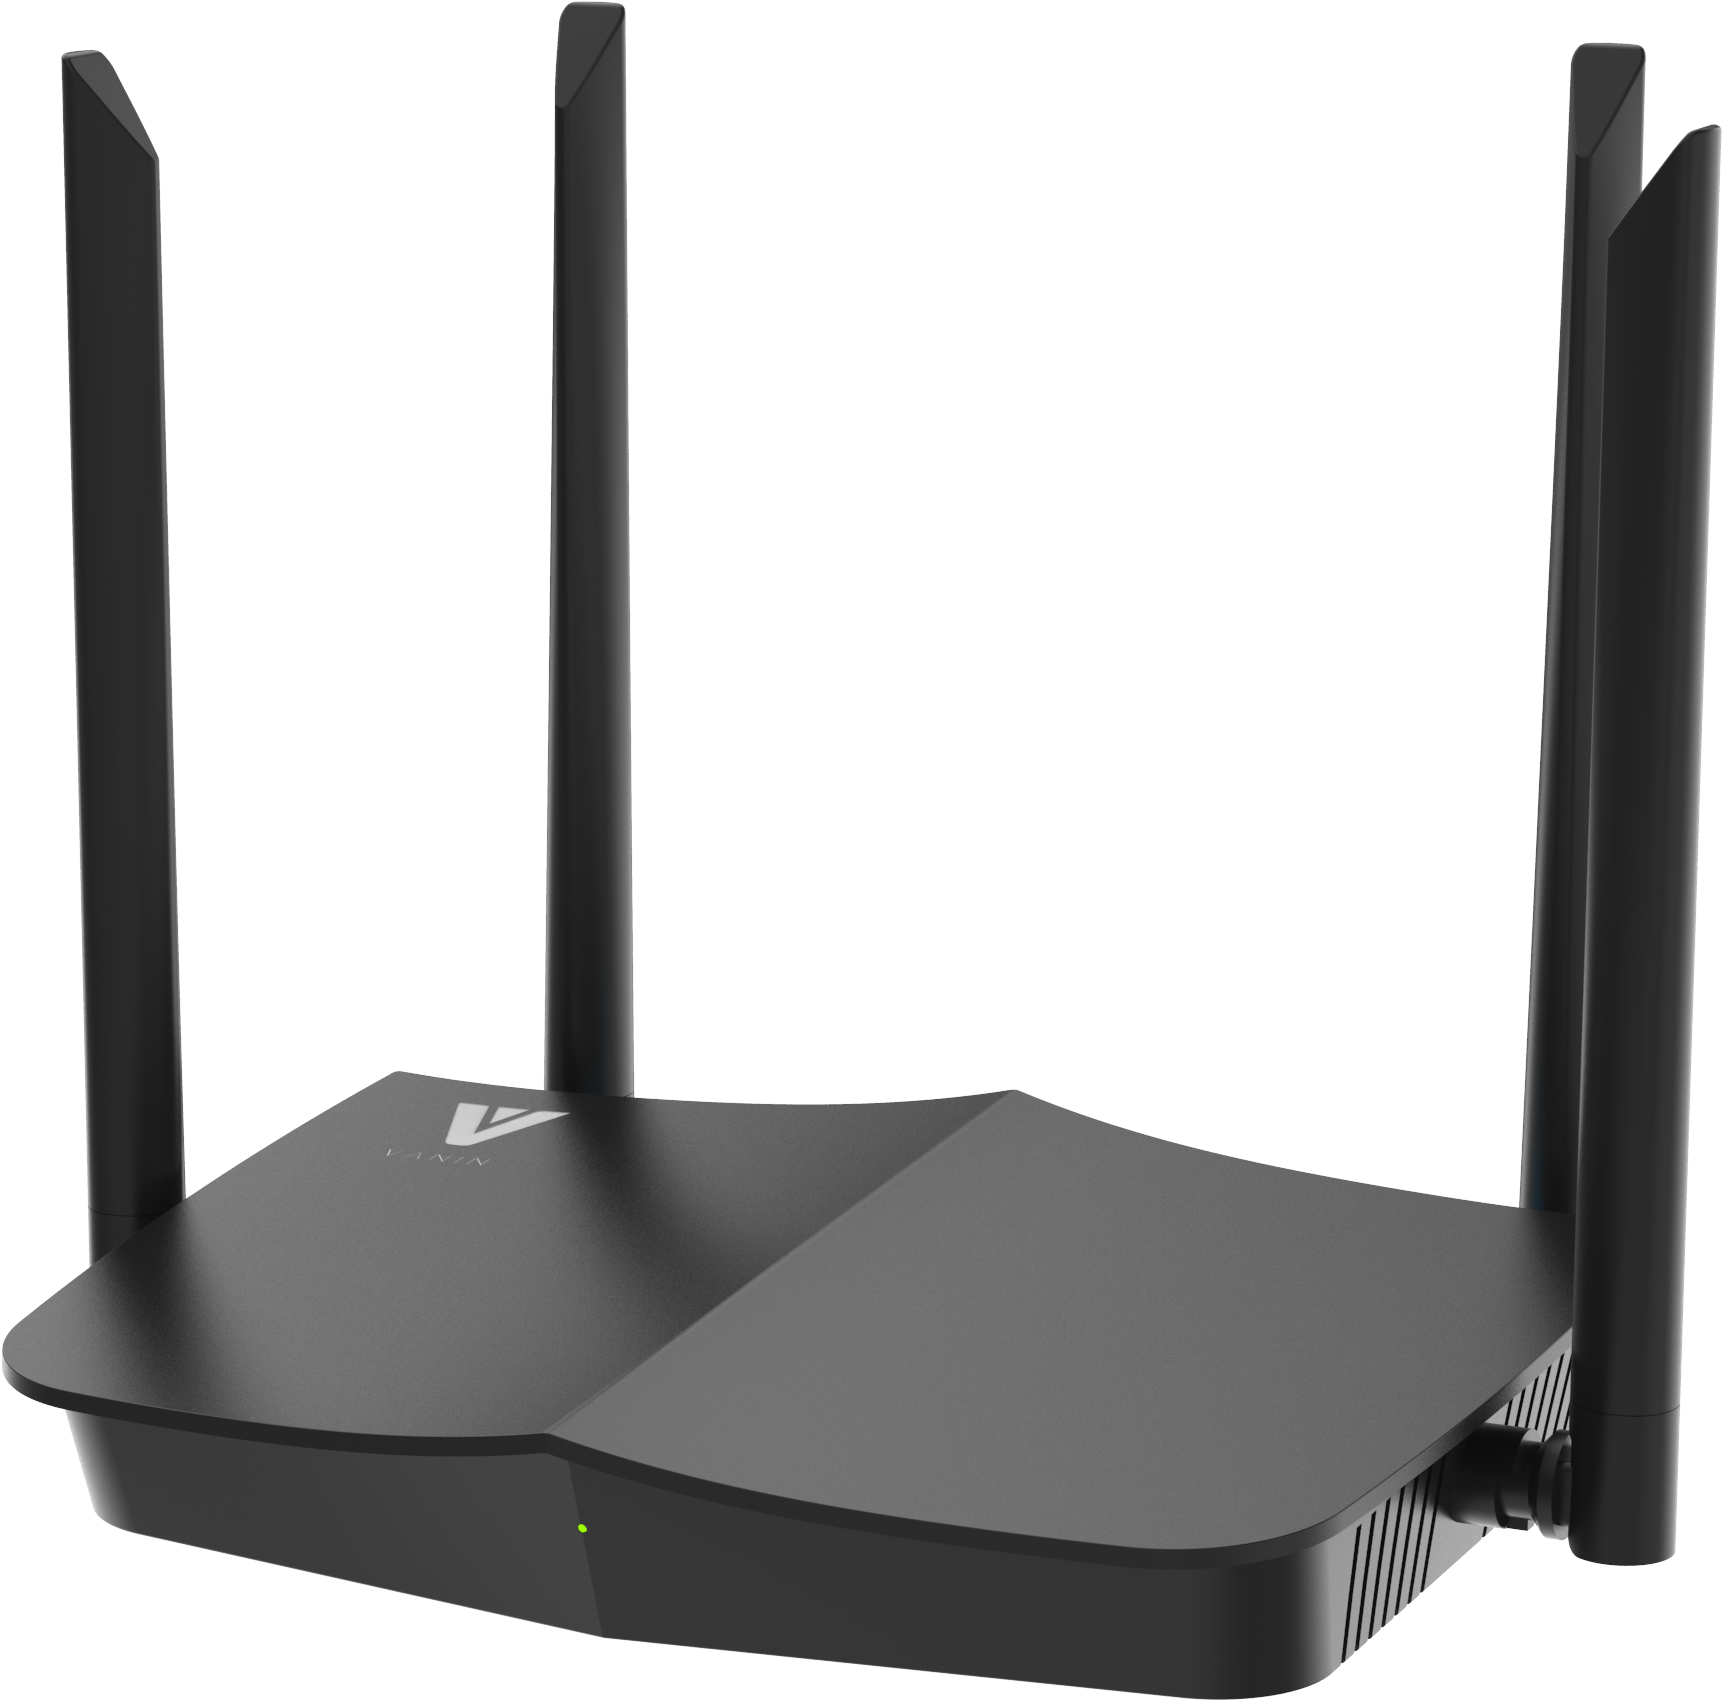 A Black Router With Antennas